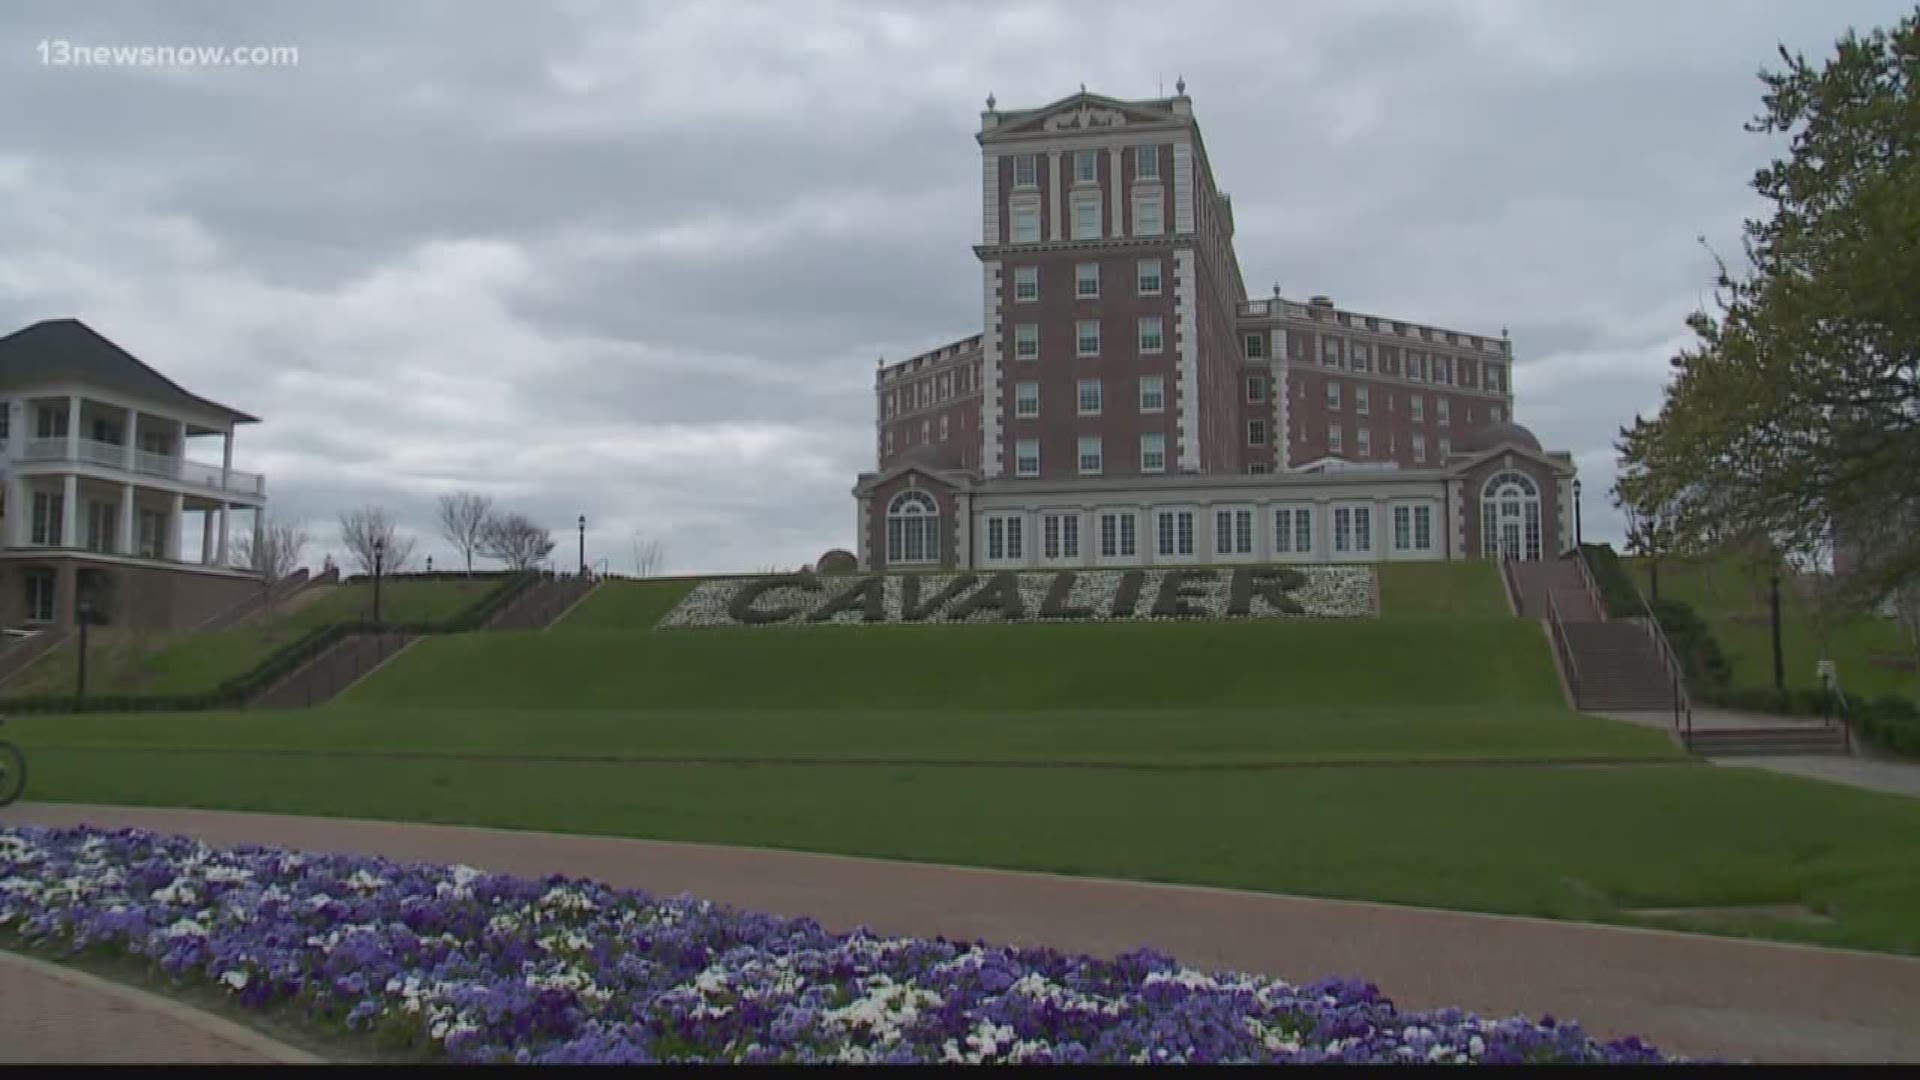 Today, we're going inside of a local staple: it's been around for decades, but now it has a different look! Here's a peek inside the newly renovated Cavalier Hotel.